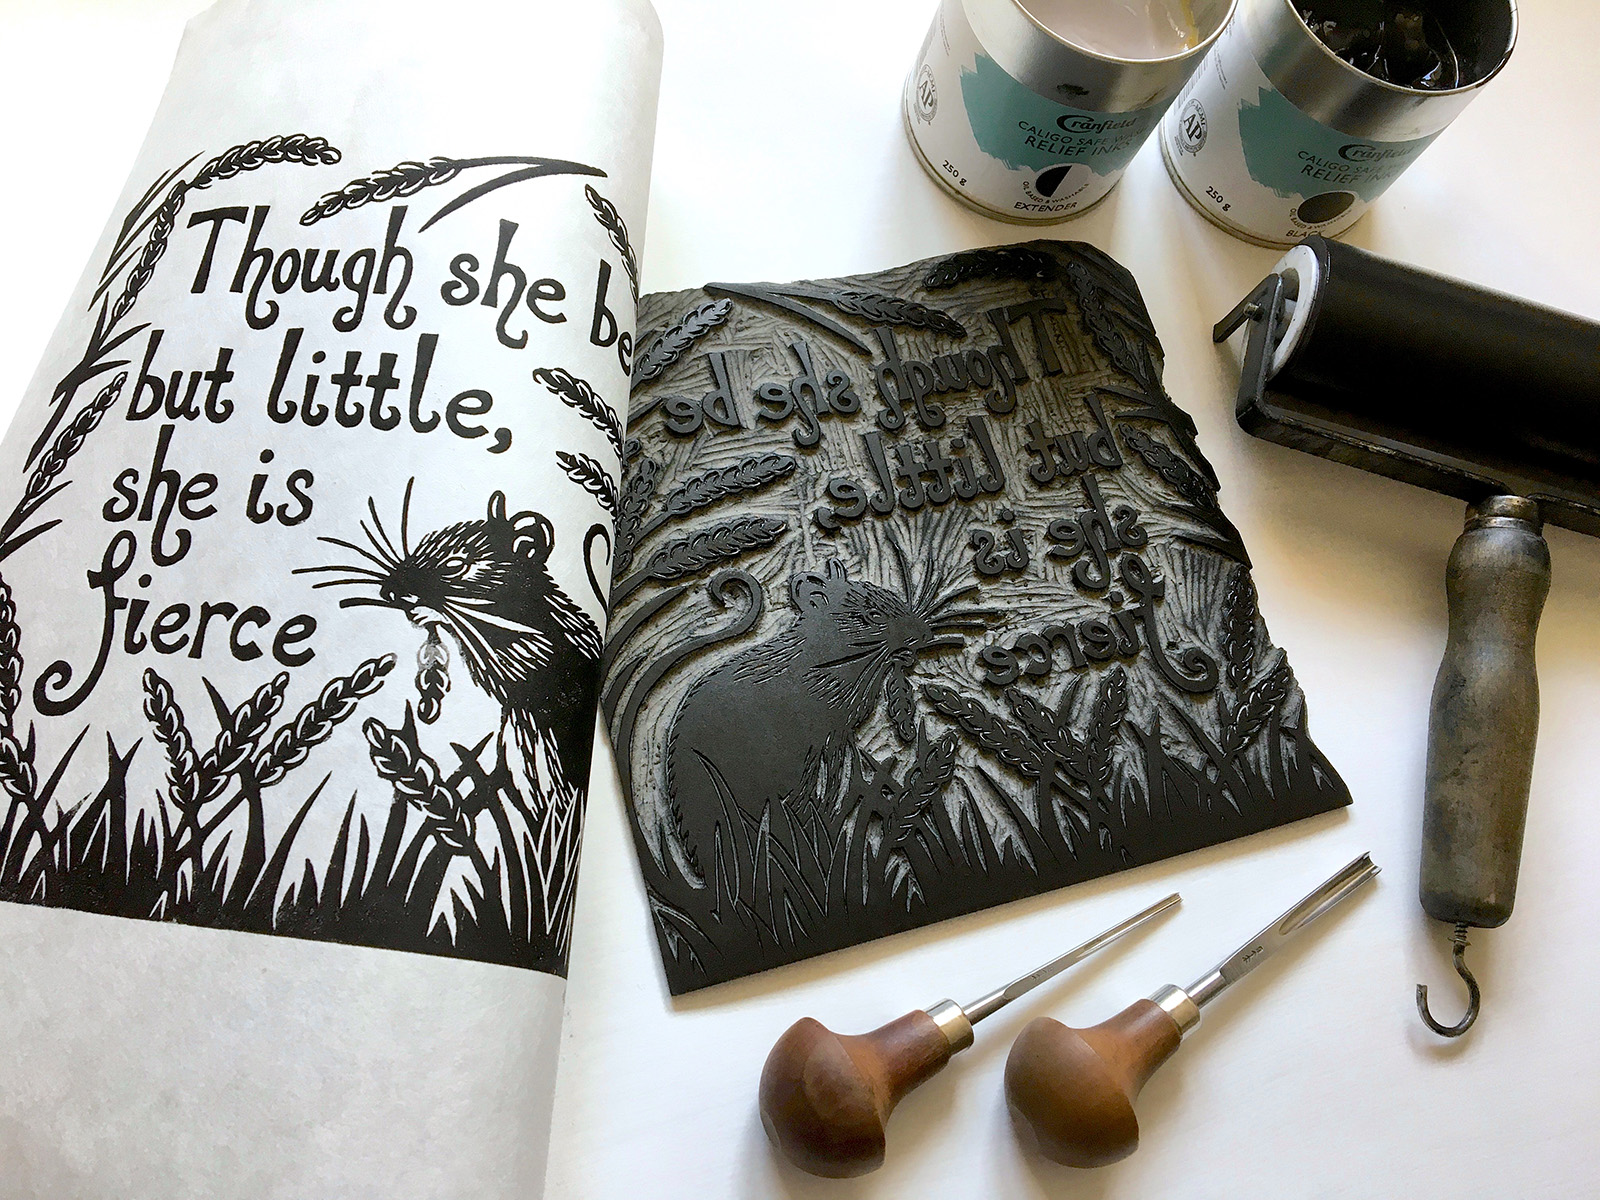 An ink print and block of a little mouse in a field with the text: Though she be but little she is fierce